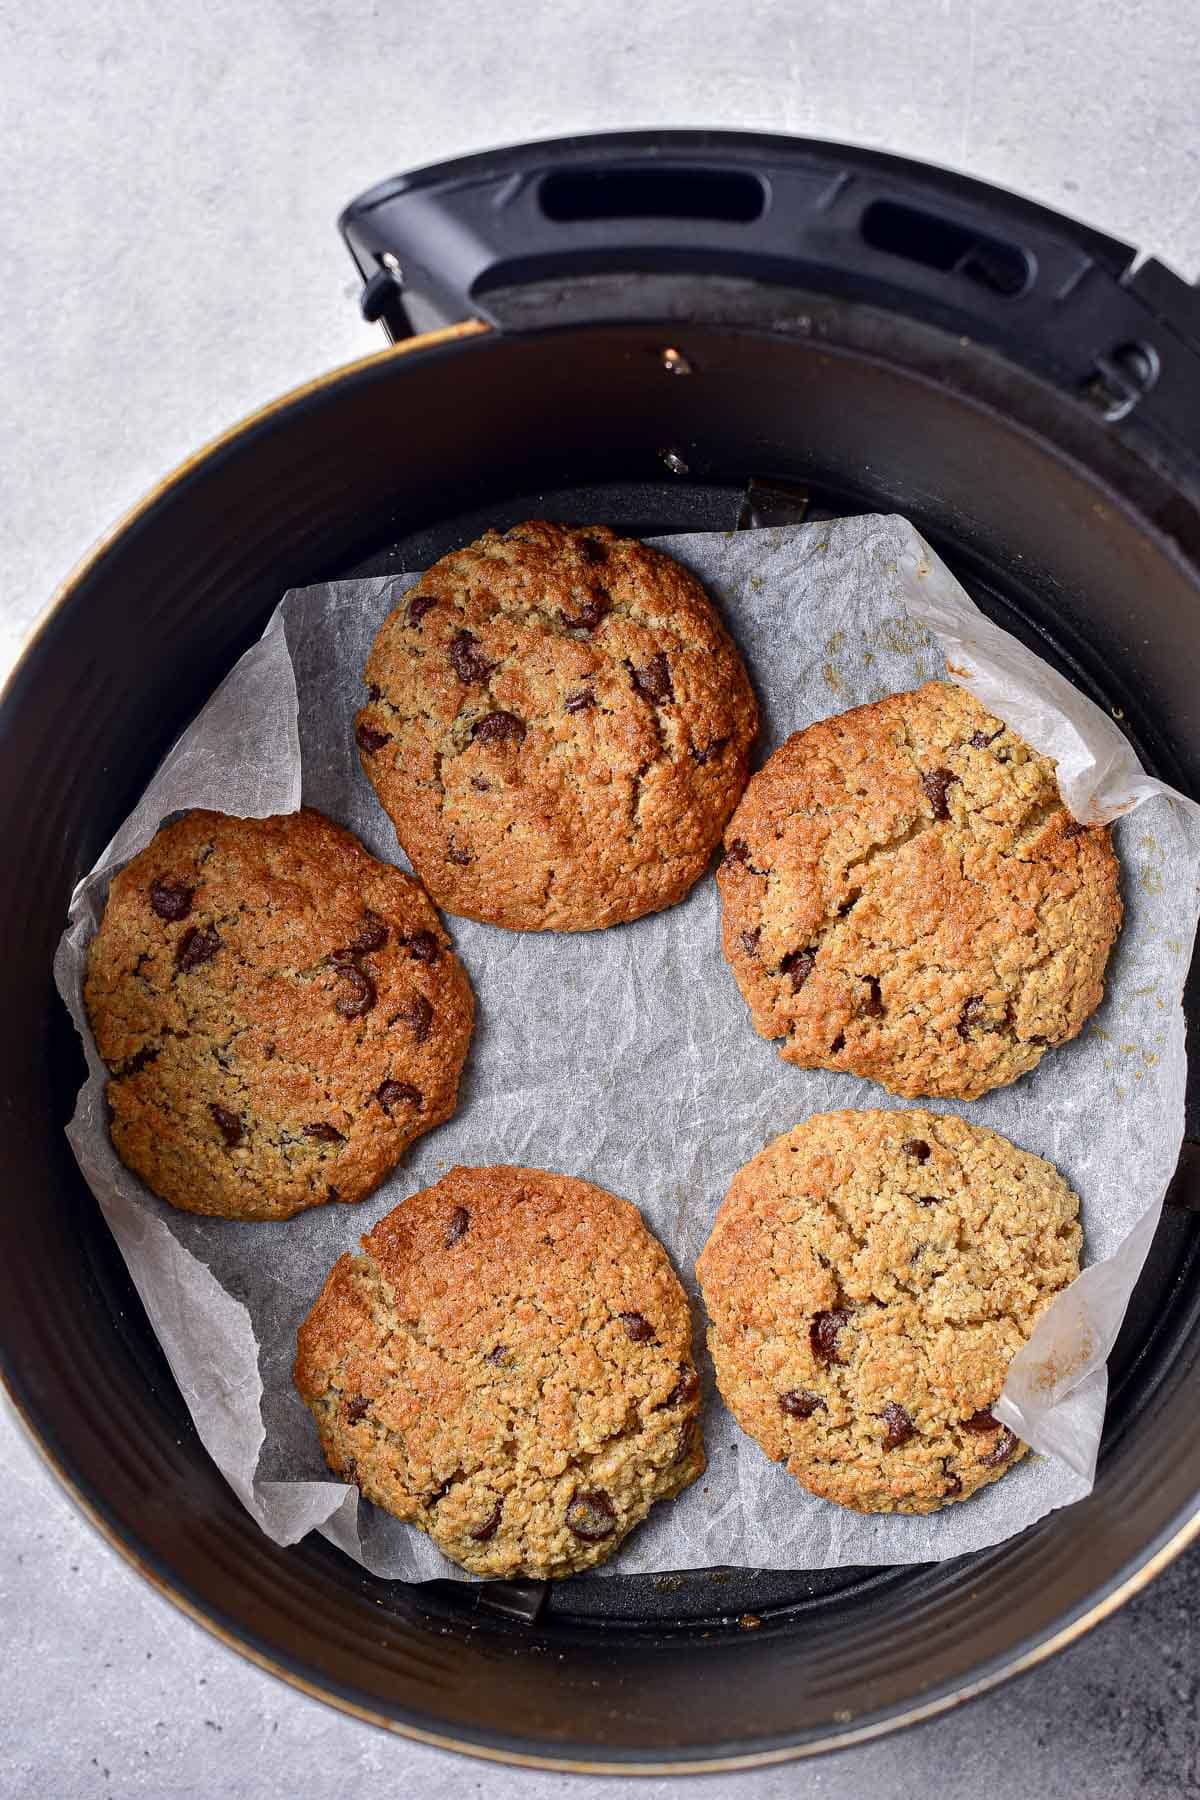 crispy oatmeal cookies on parchment paper in round black air fryer basket.